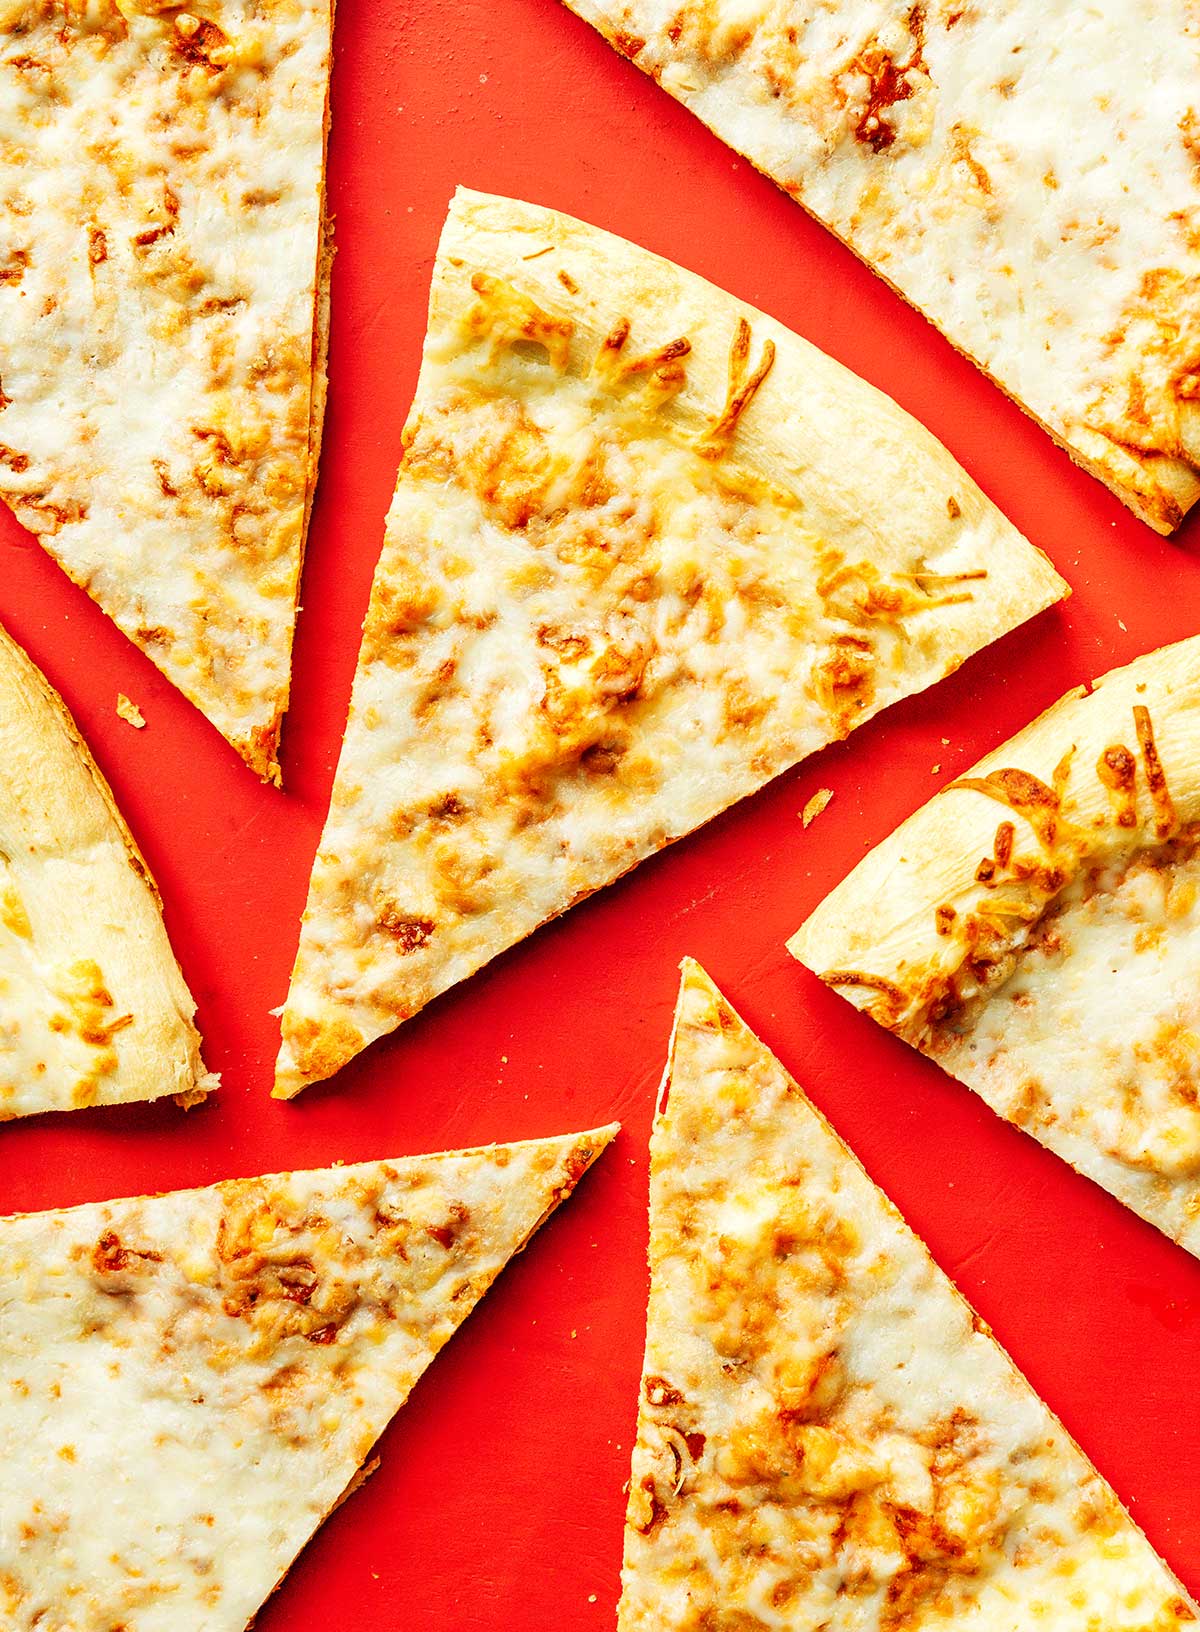 Leftover pizza slices neatly arranged on a red background